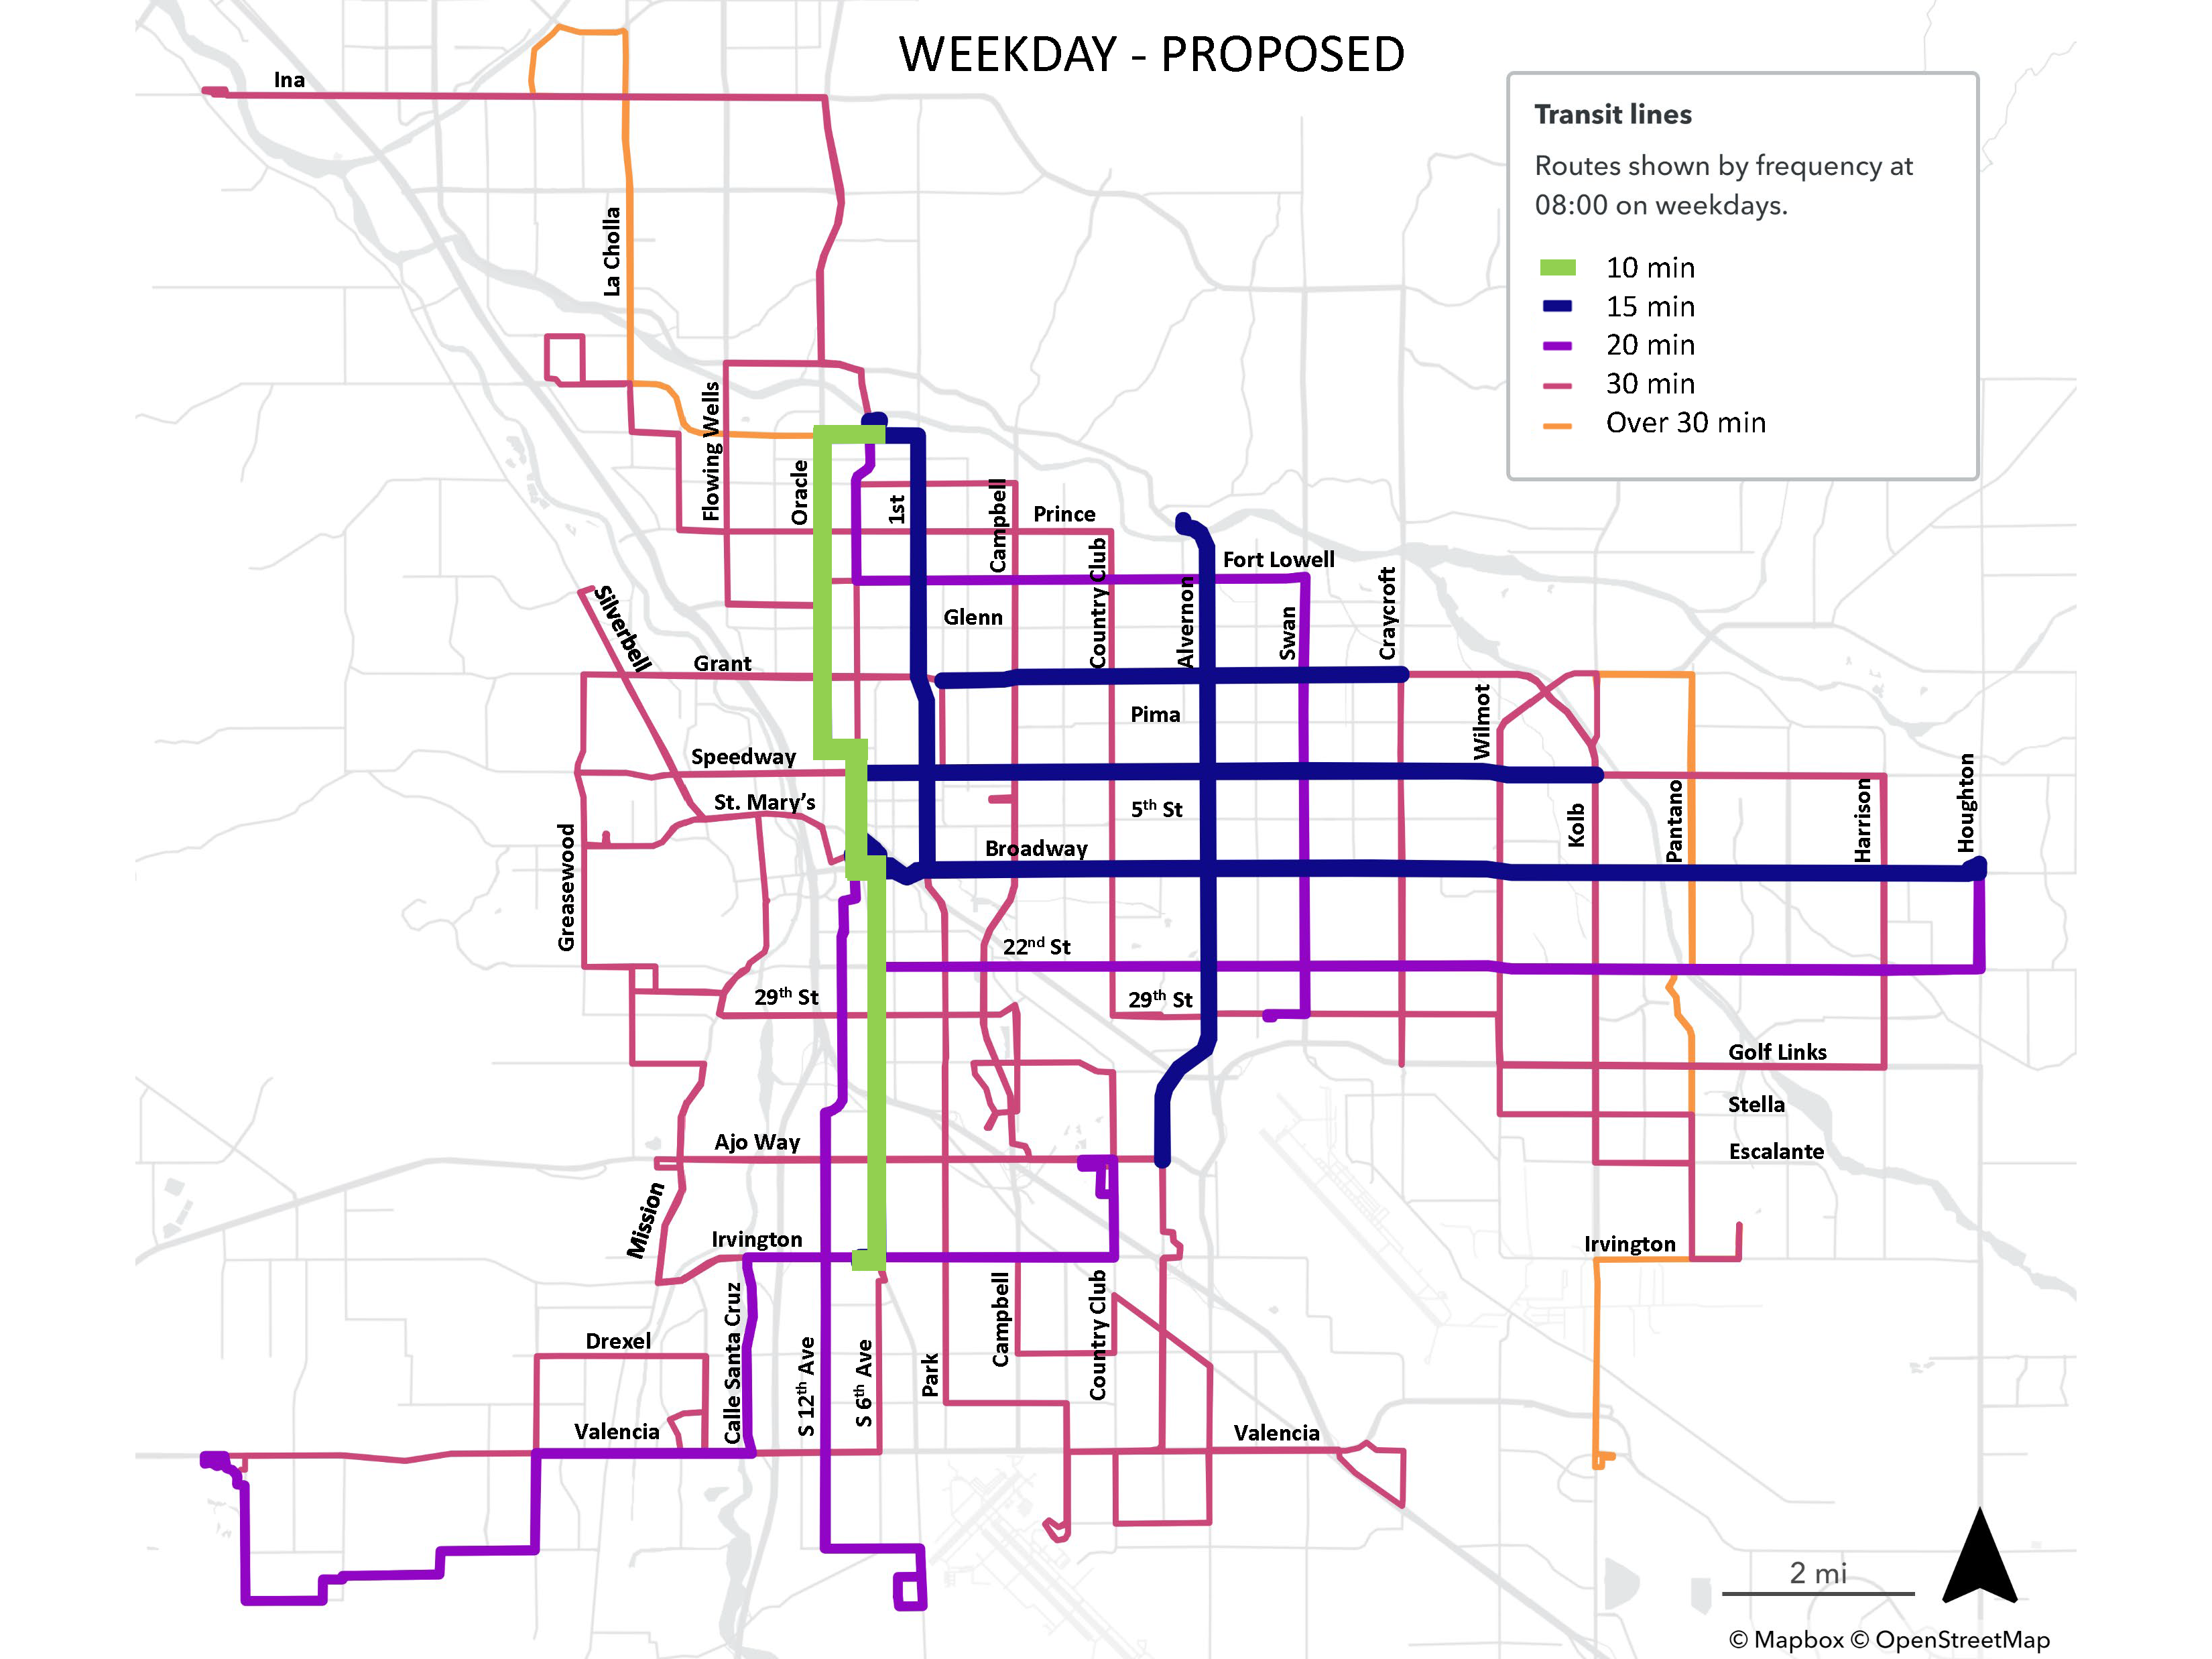 Weekday Proposed Frequency Map